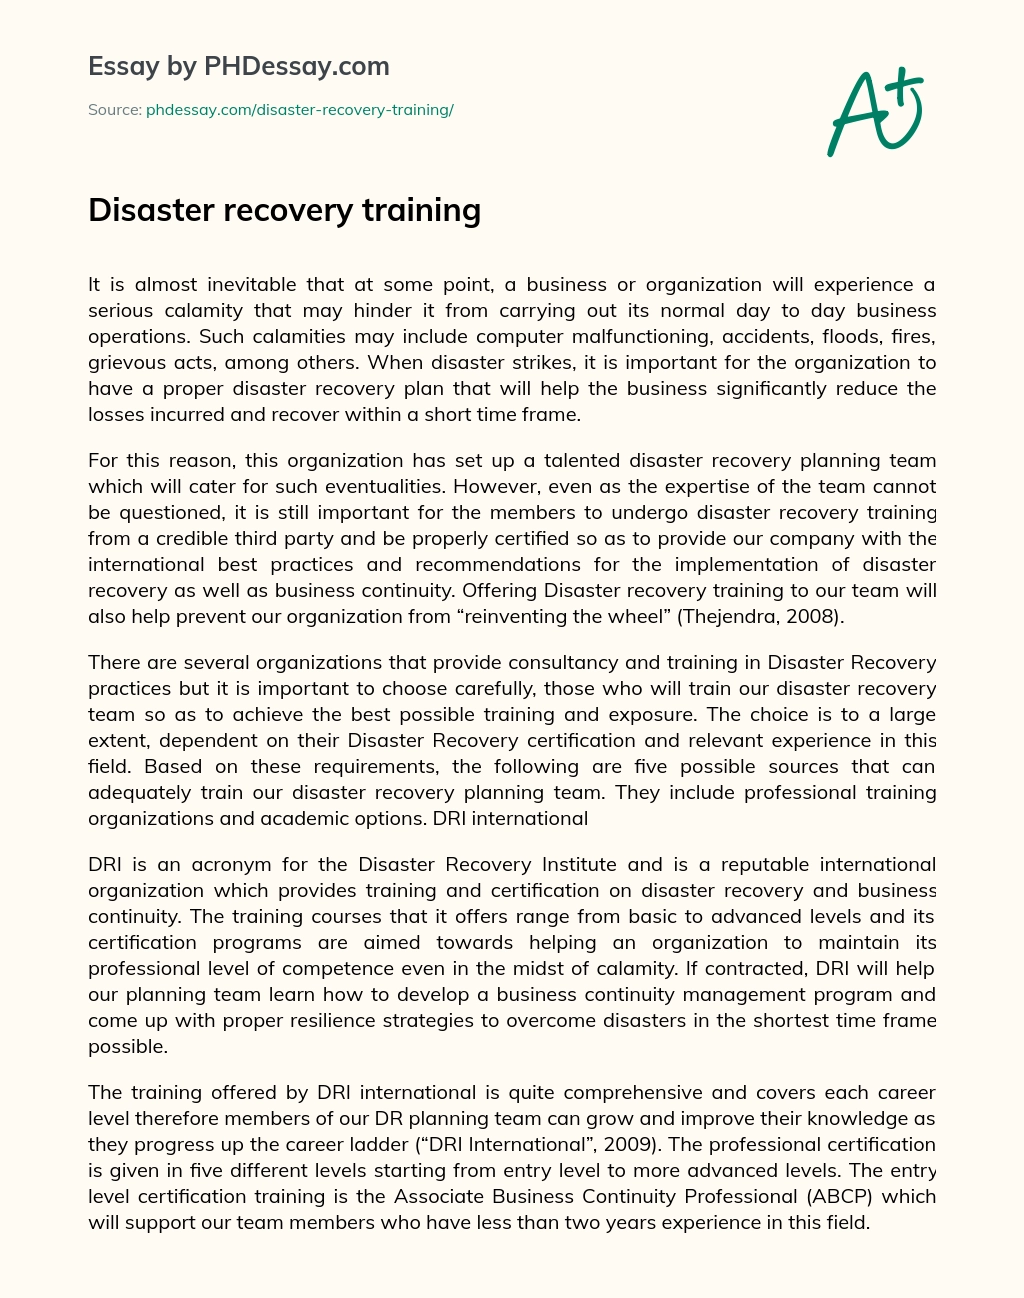 Disaster recovery training essay